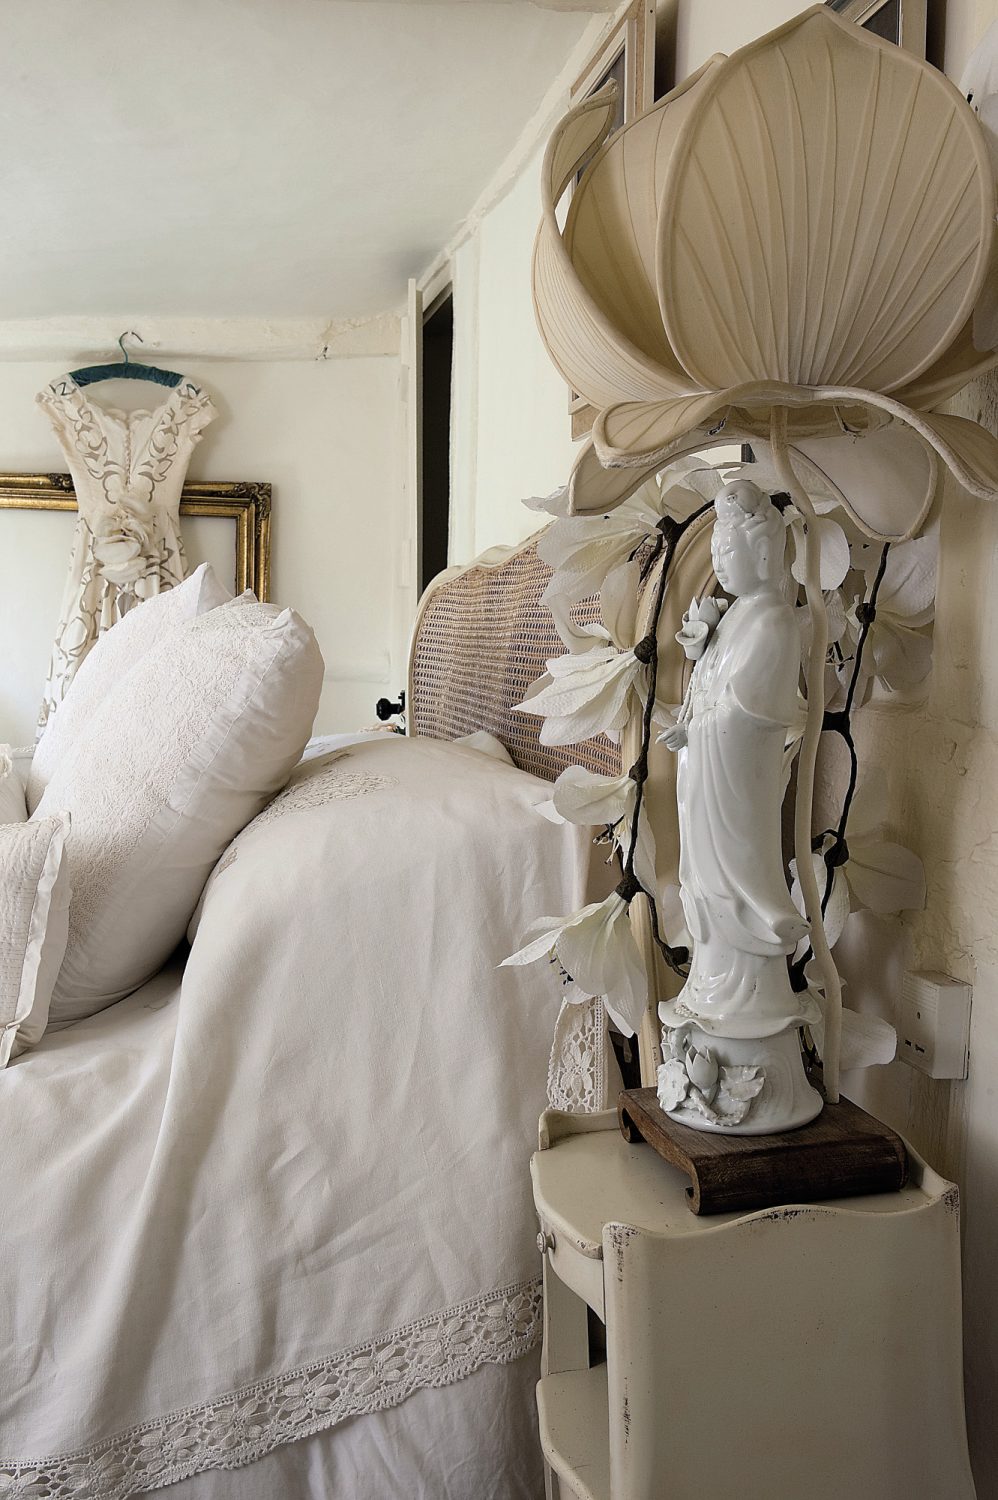 In the second bedroom again there are plenty of decorative flourishes. Ornate gilded and mirrored sconces hang above an exuberantly carved console table. Embroidered shawls cover the radiators and a vintage cutwork wedding dress is displayed on one wall